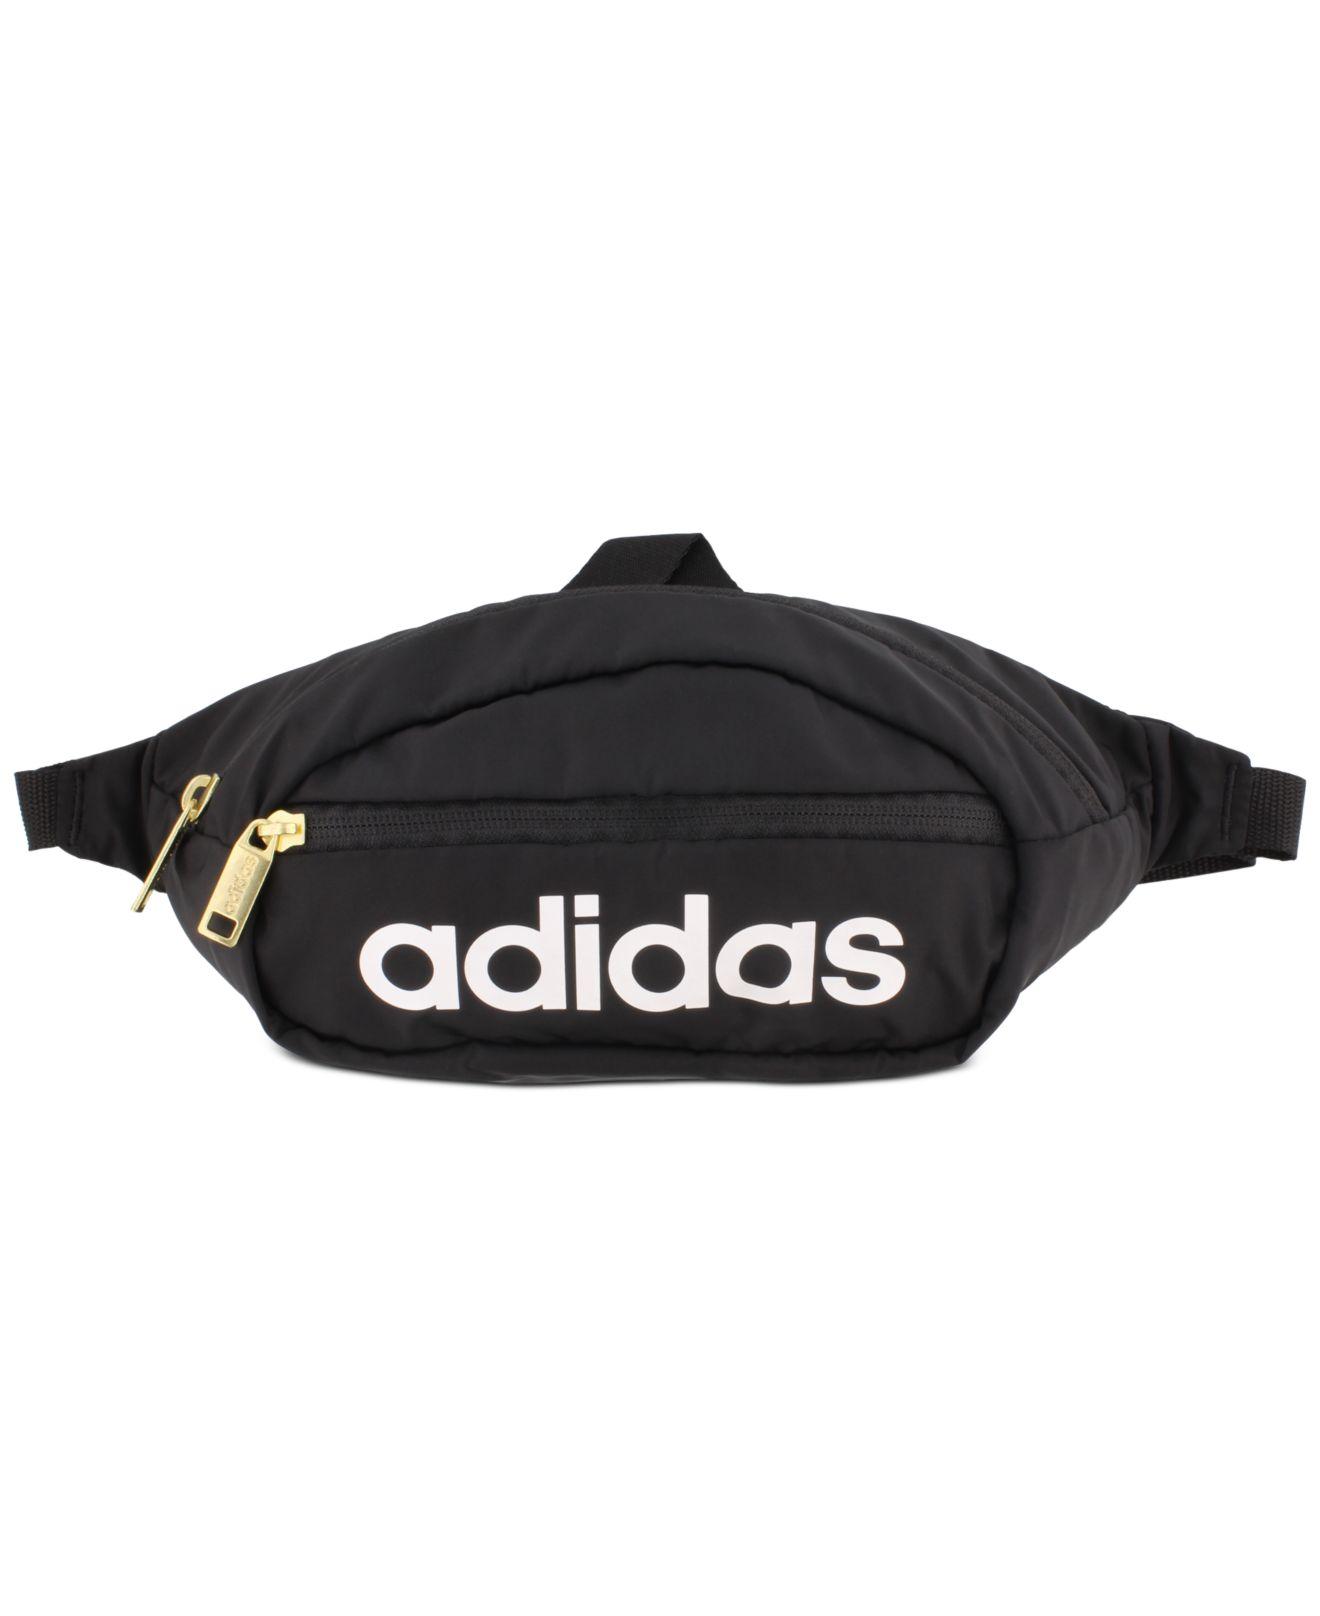 adidas Core Waist Pack in Black | Lyst